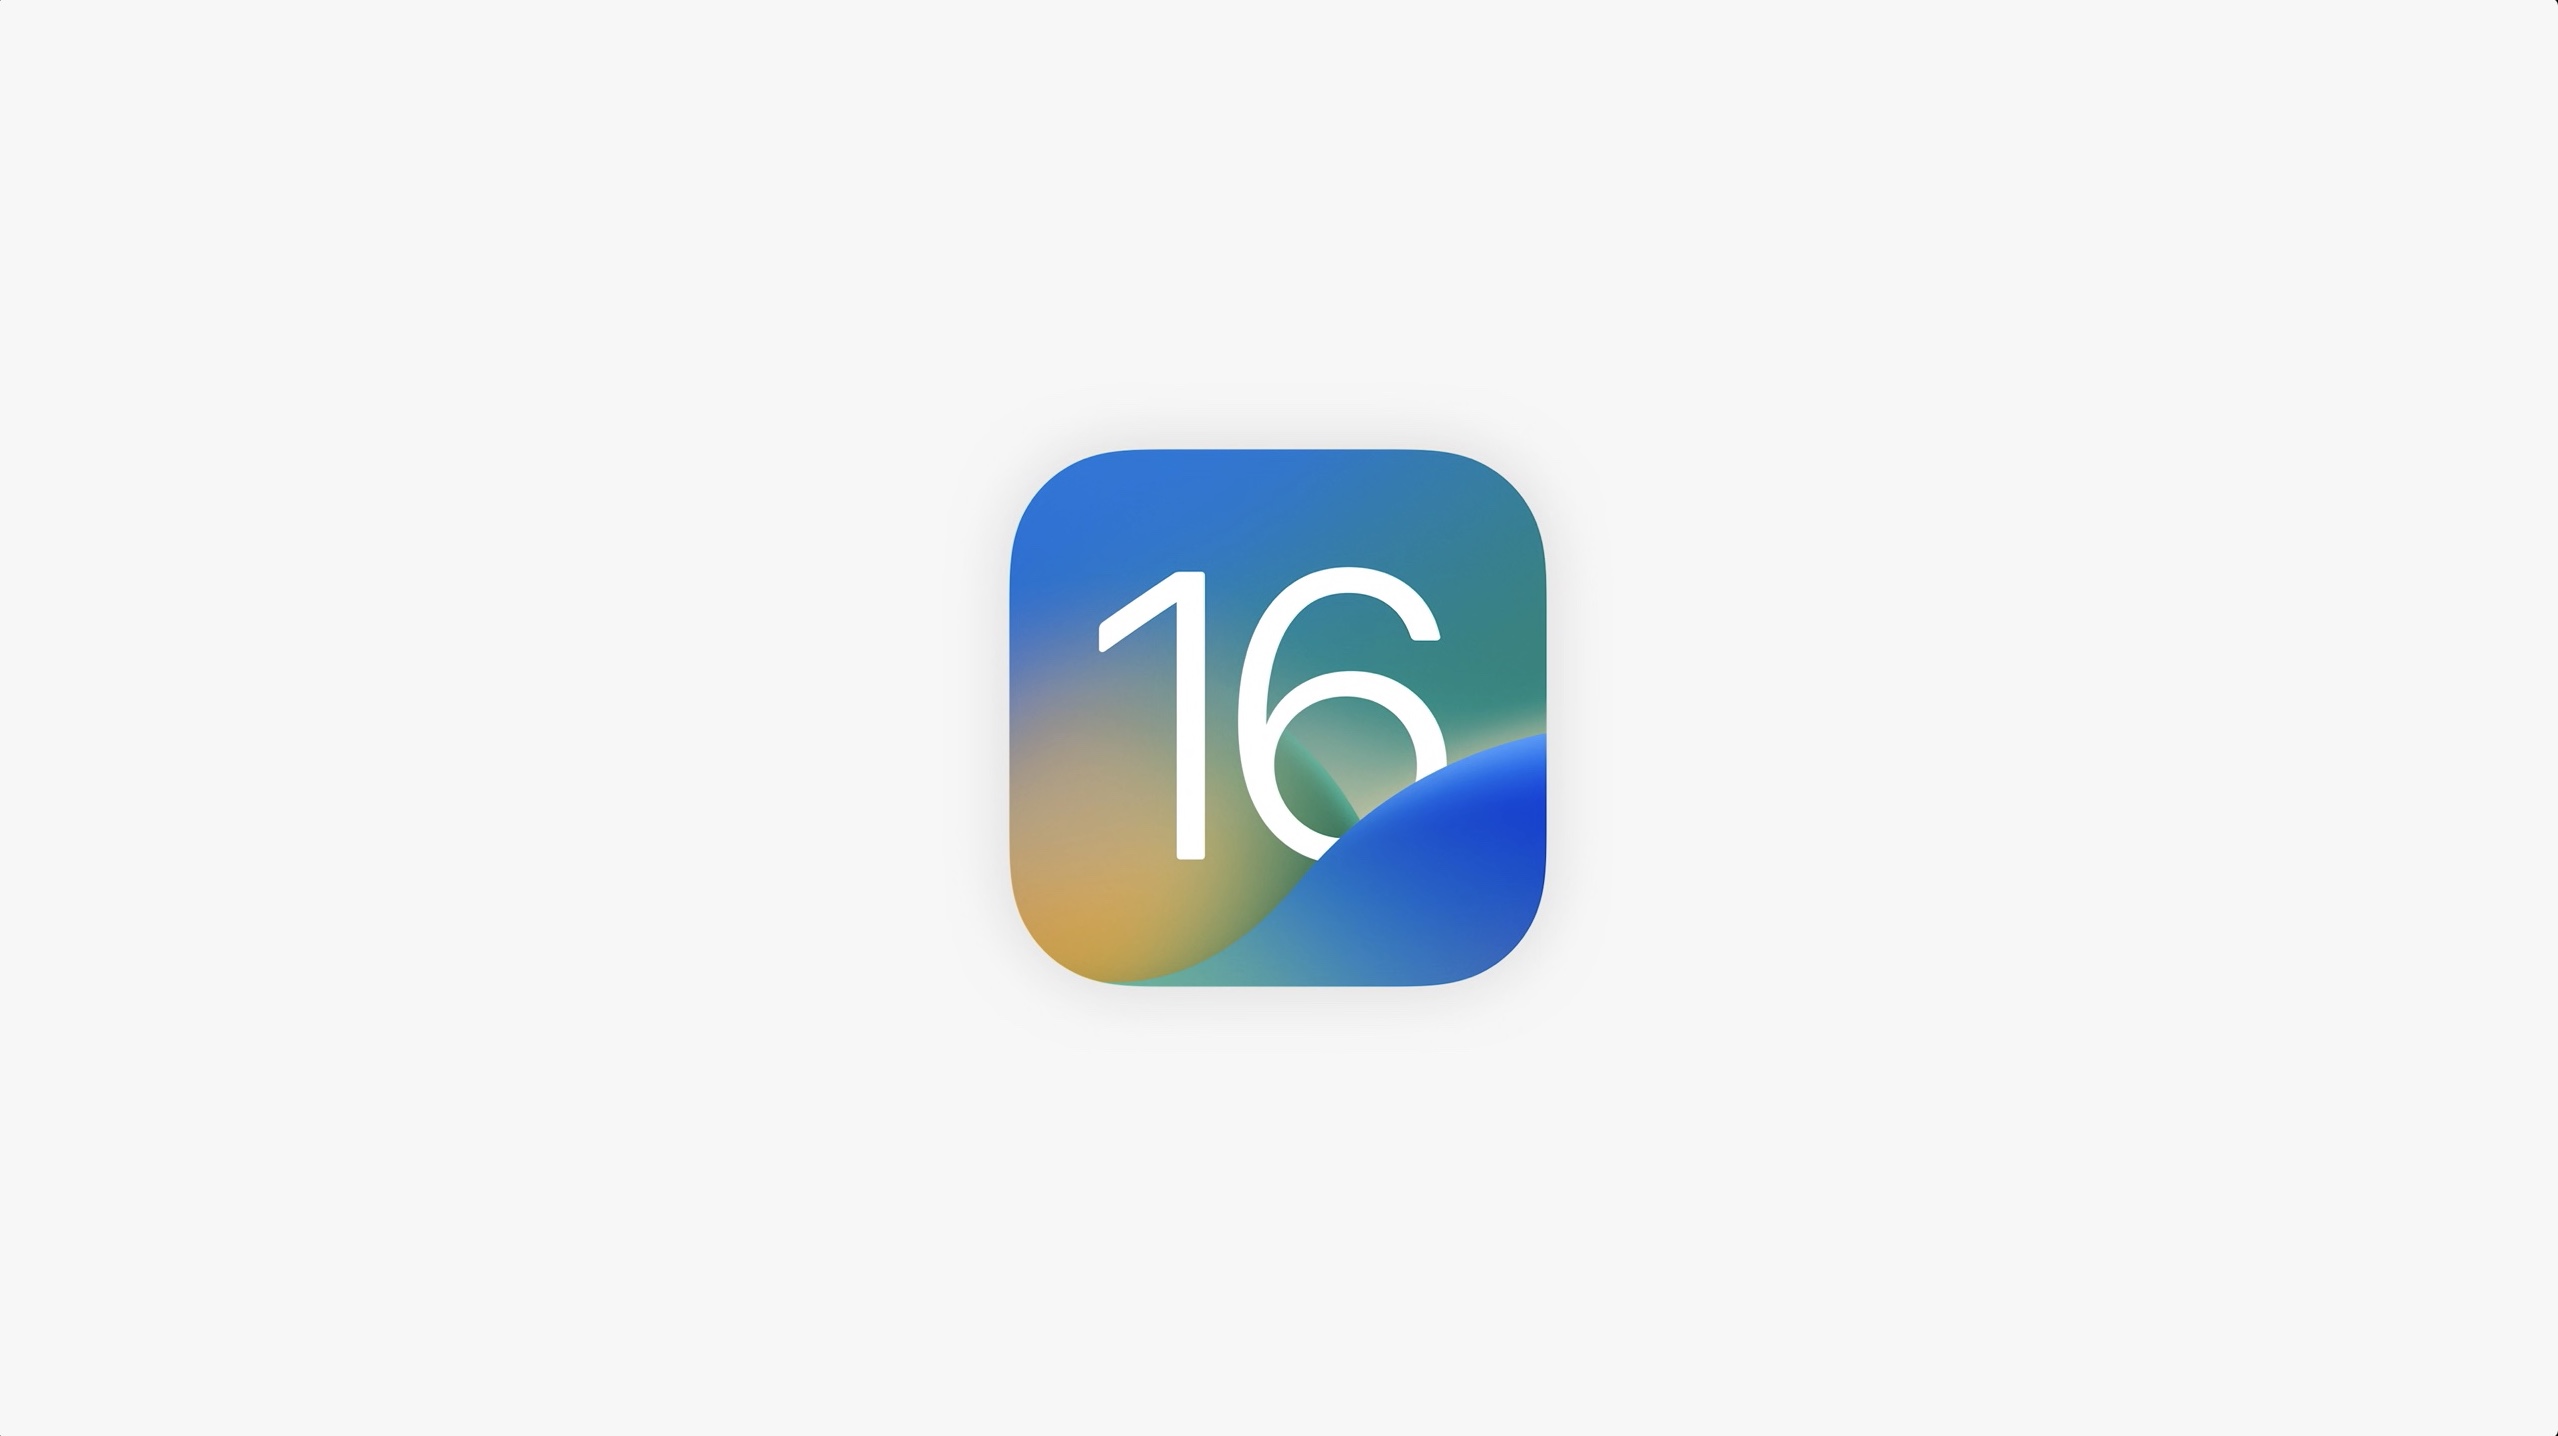 A roundup of Apple’s new features coming with iOS 16.2, iPadOS 16.2, macOS Ventura 13.1, watchOS 9.2 and tvOS 16.2